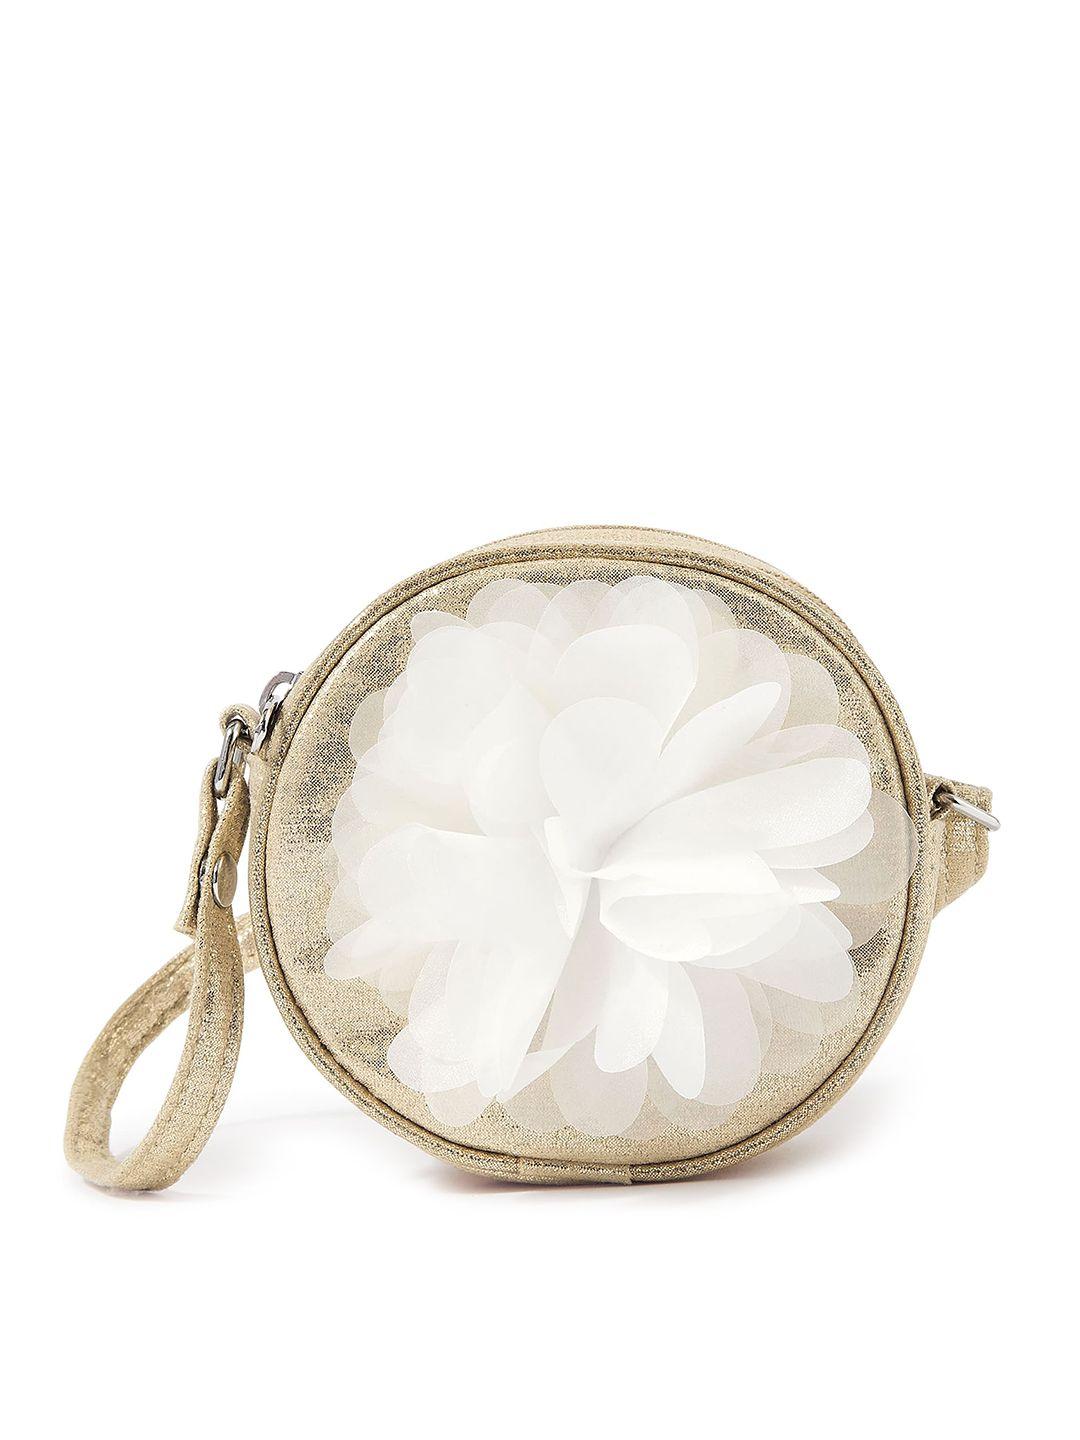 accessorize-london-girls-corsage-round-sling-bag